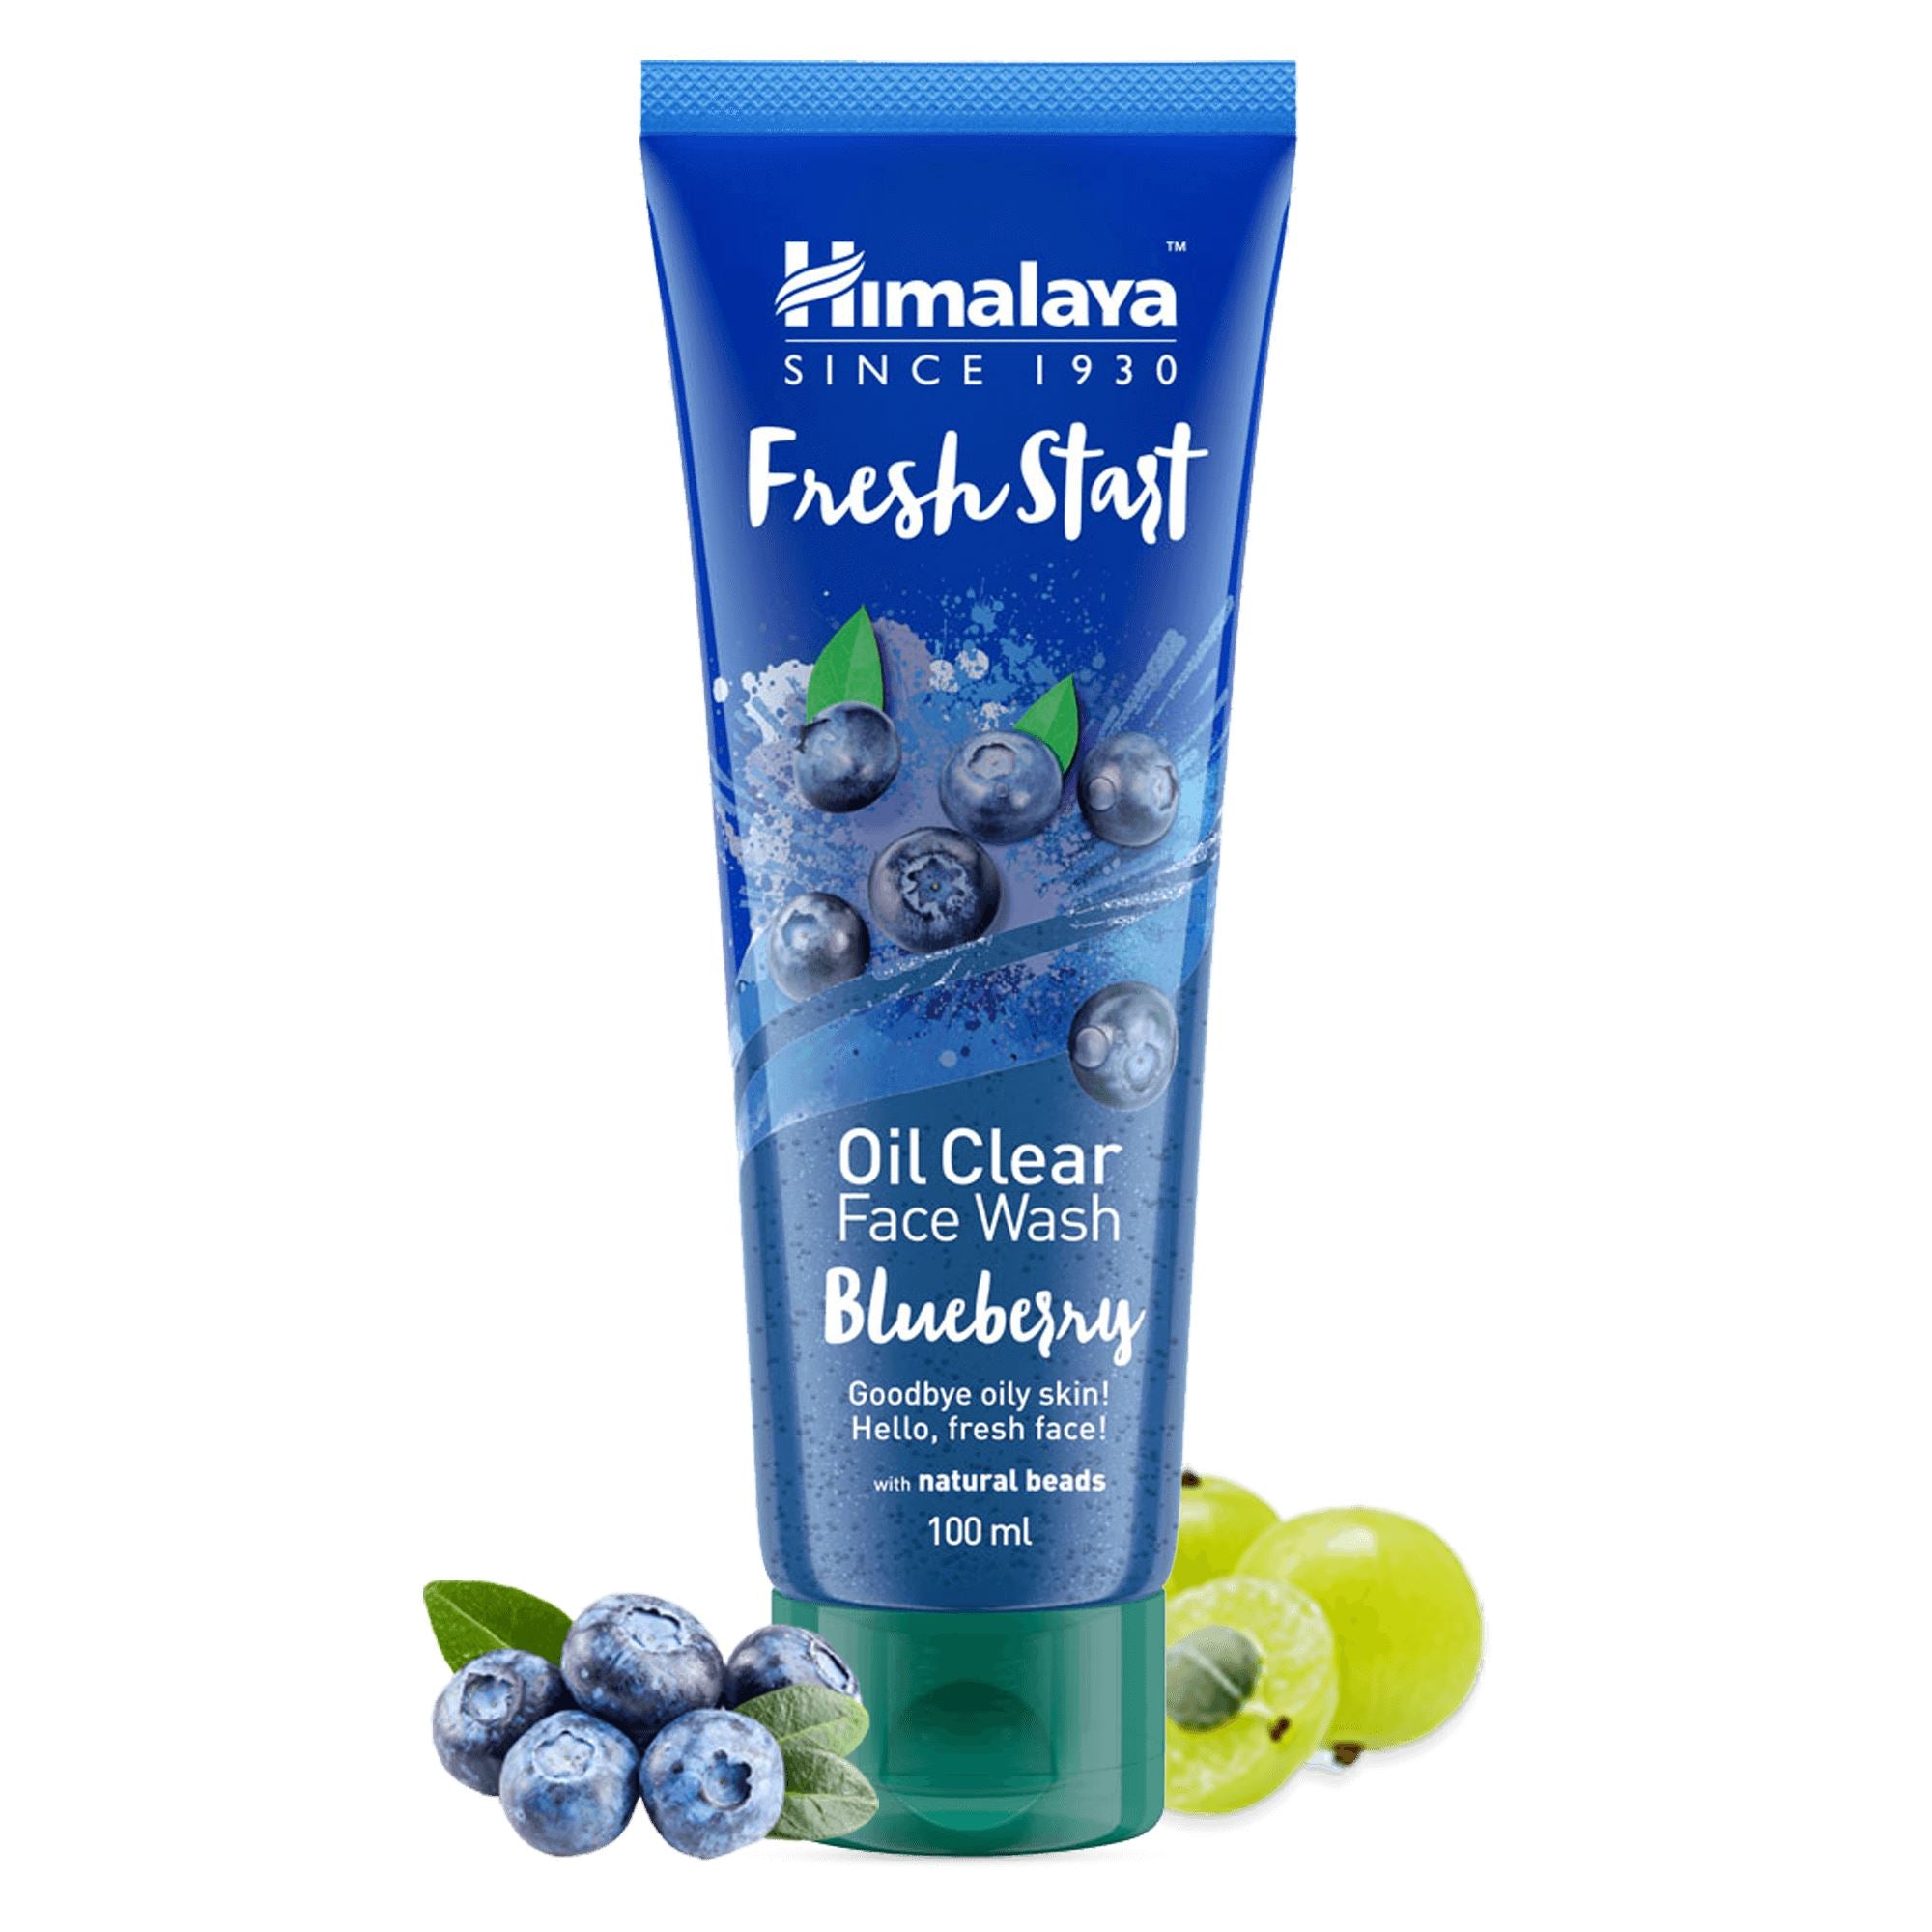 Himalaya Fresh Start Oil Clear Blueberry Face Wash 100ml - Helps remove excess oil, dirt, and impurities